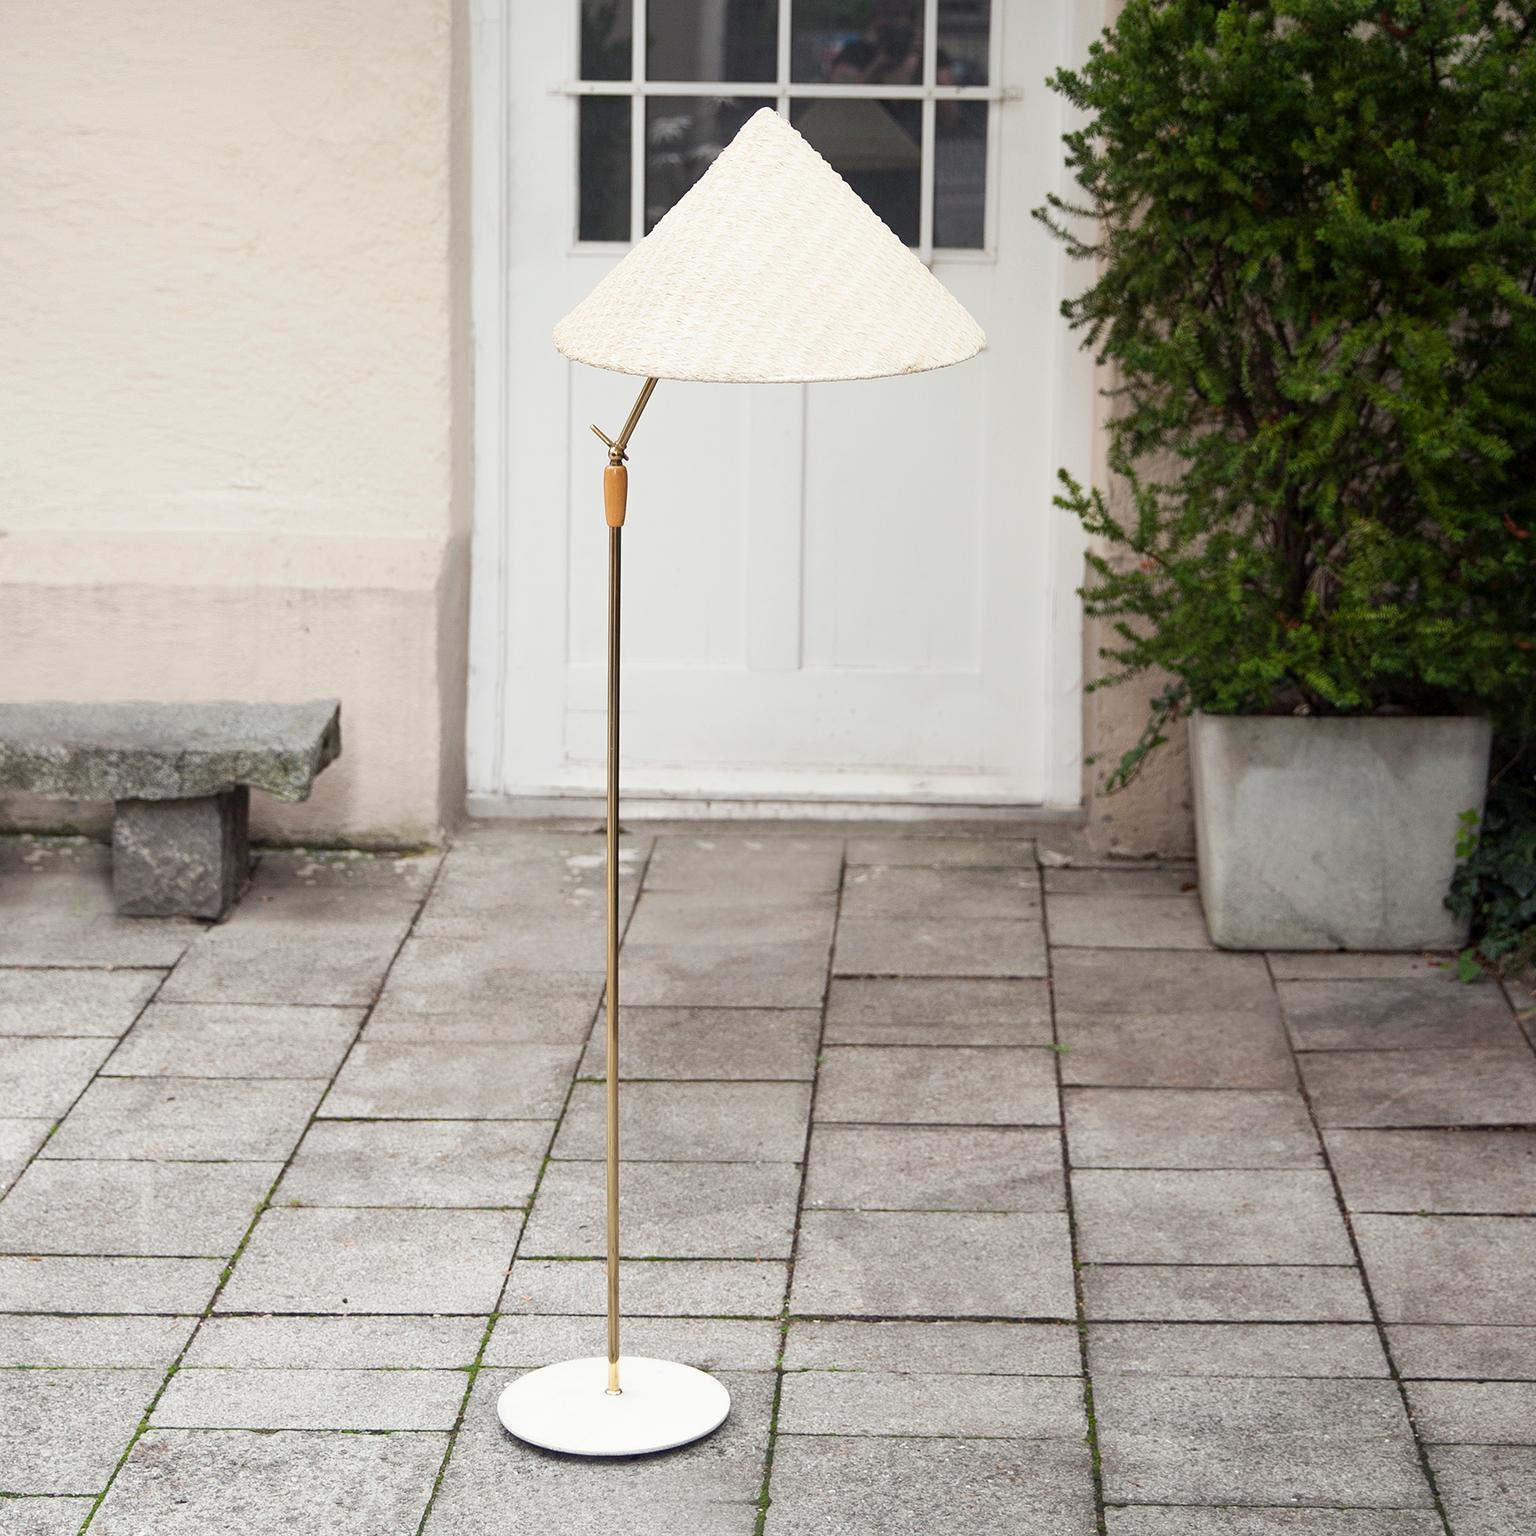 Vintage floor lamp from Kalmar Austria with adjustable stand and flexible bast cord shade.